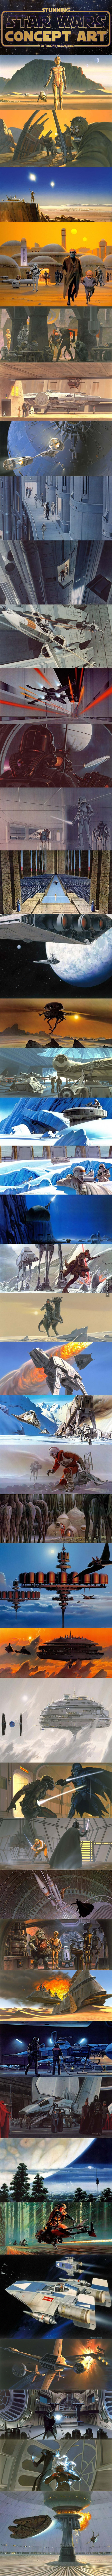 This-my-friends-is-where-Star-Wars-was-born